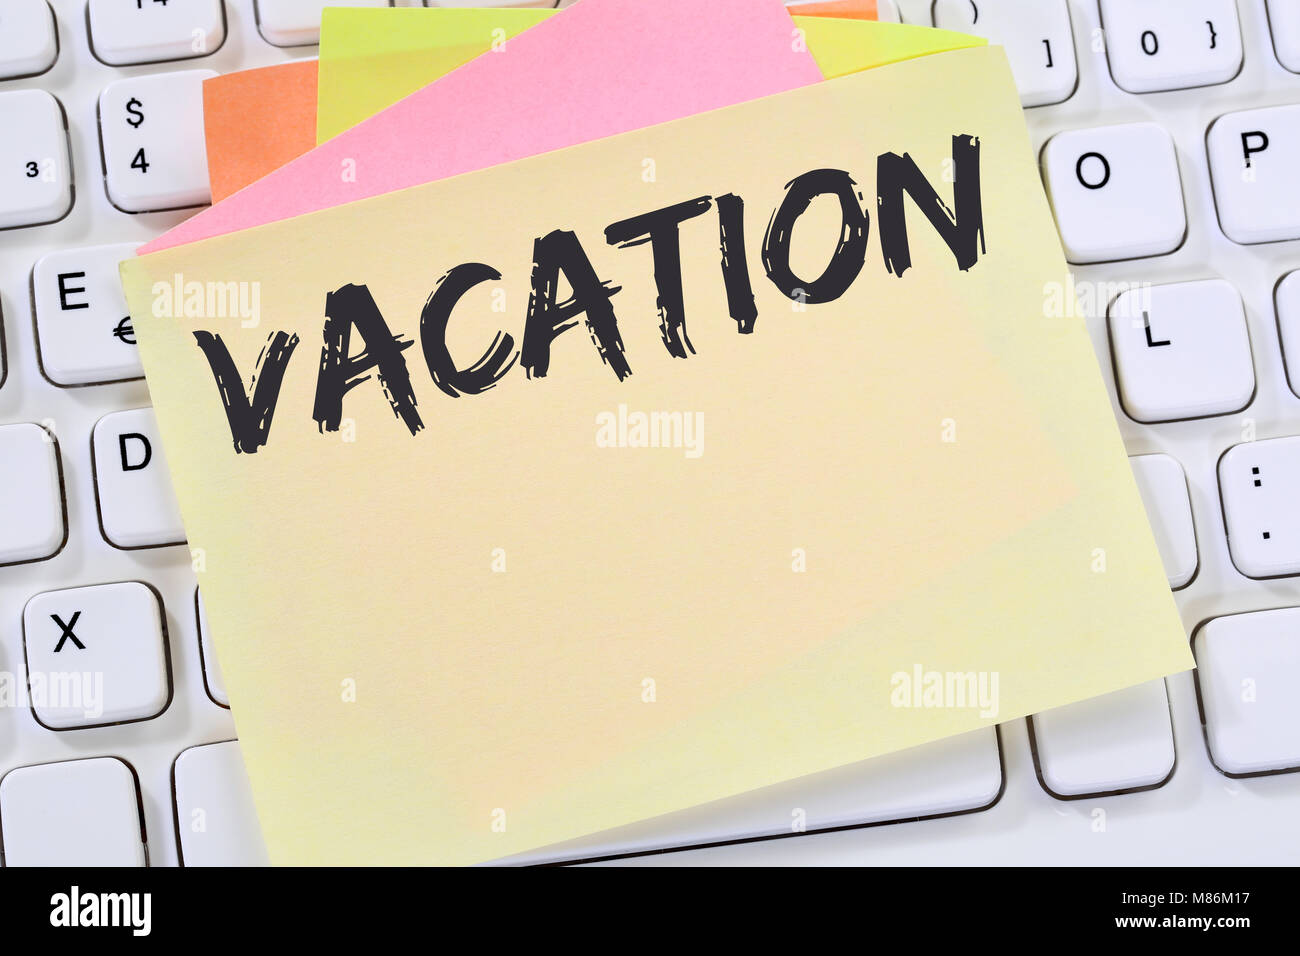 Vacation holiday holidays relax relaxed break free time business note paper computer keyboard Stock Photo